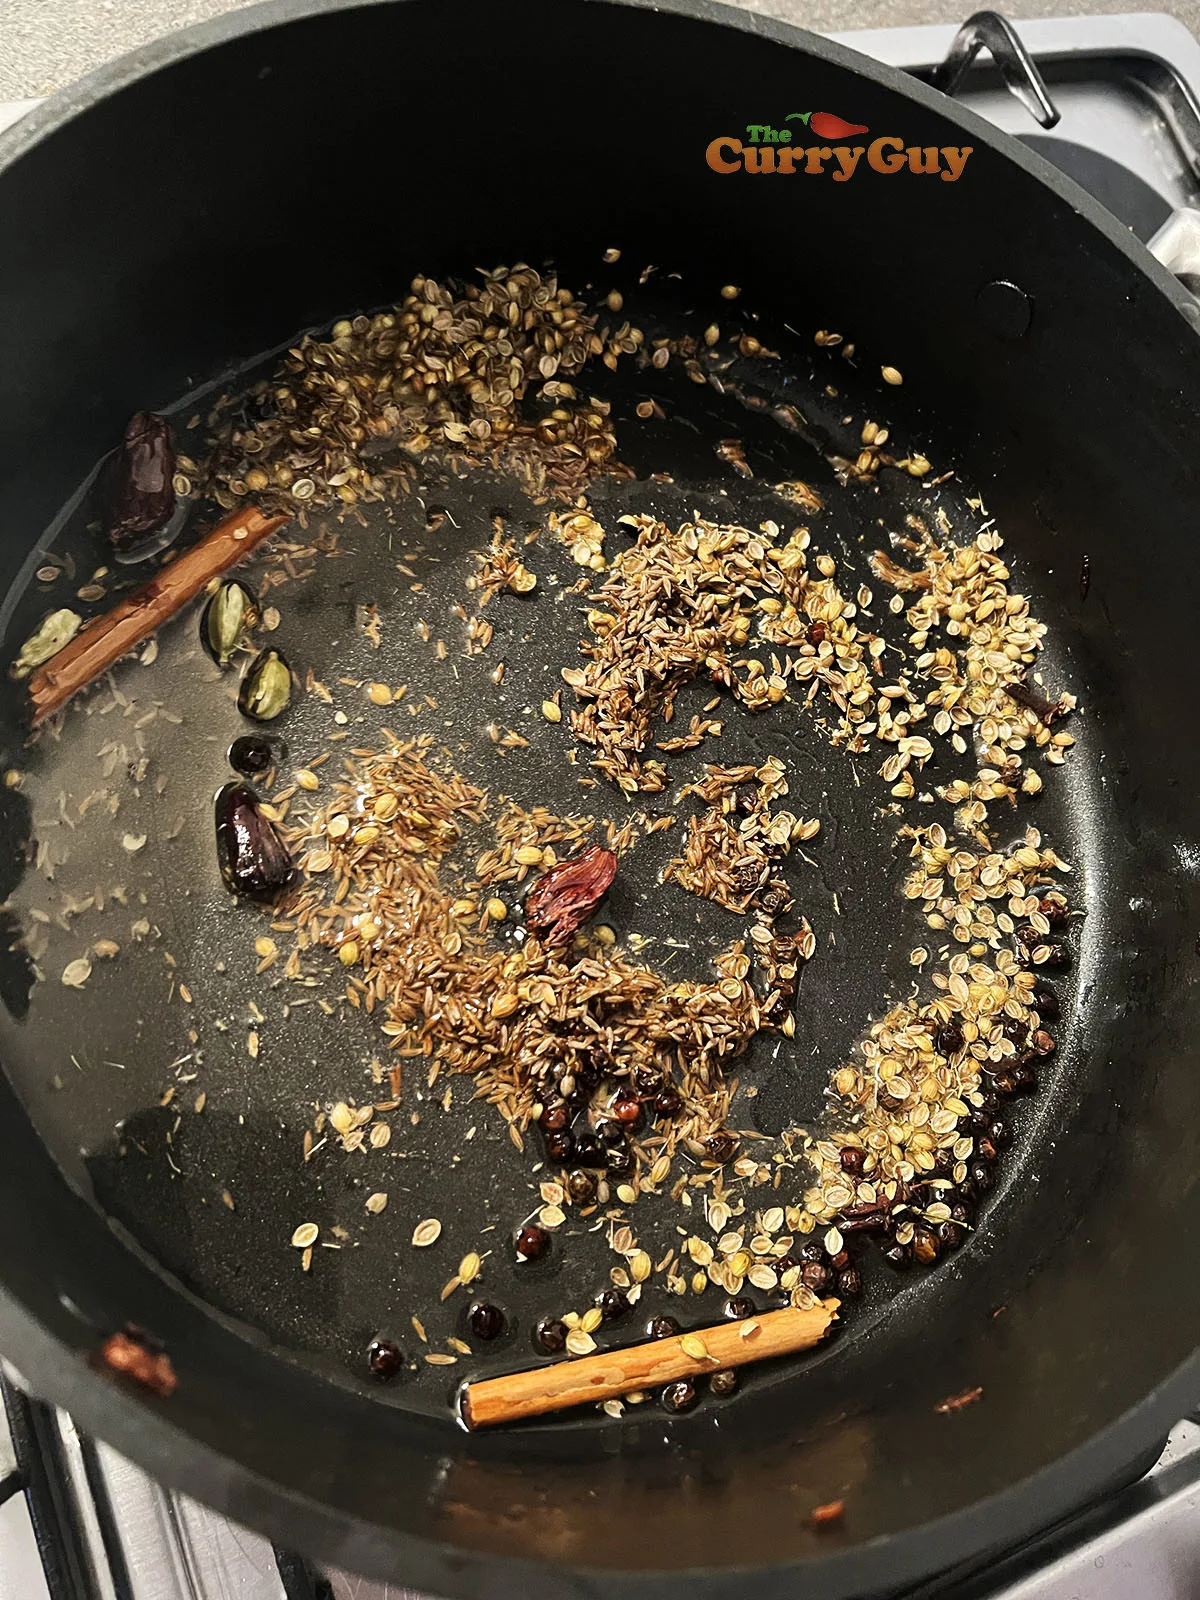 Infusing spices in oil